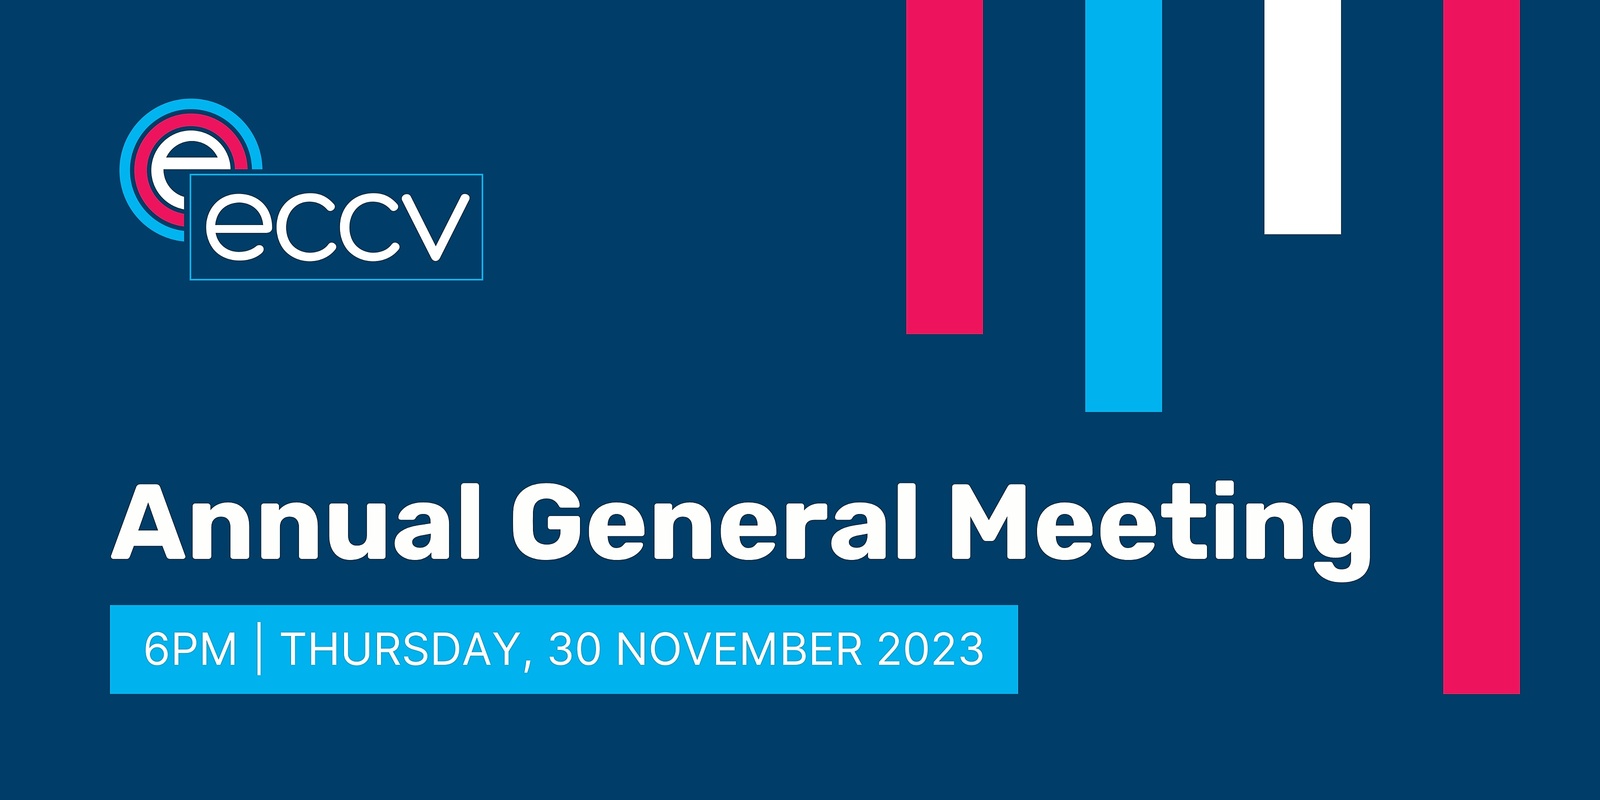 Banner image for ECCV Annual General Meeting 2023